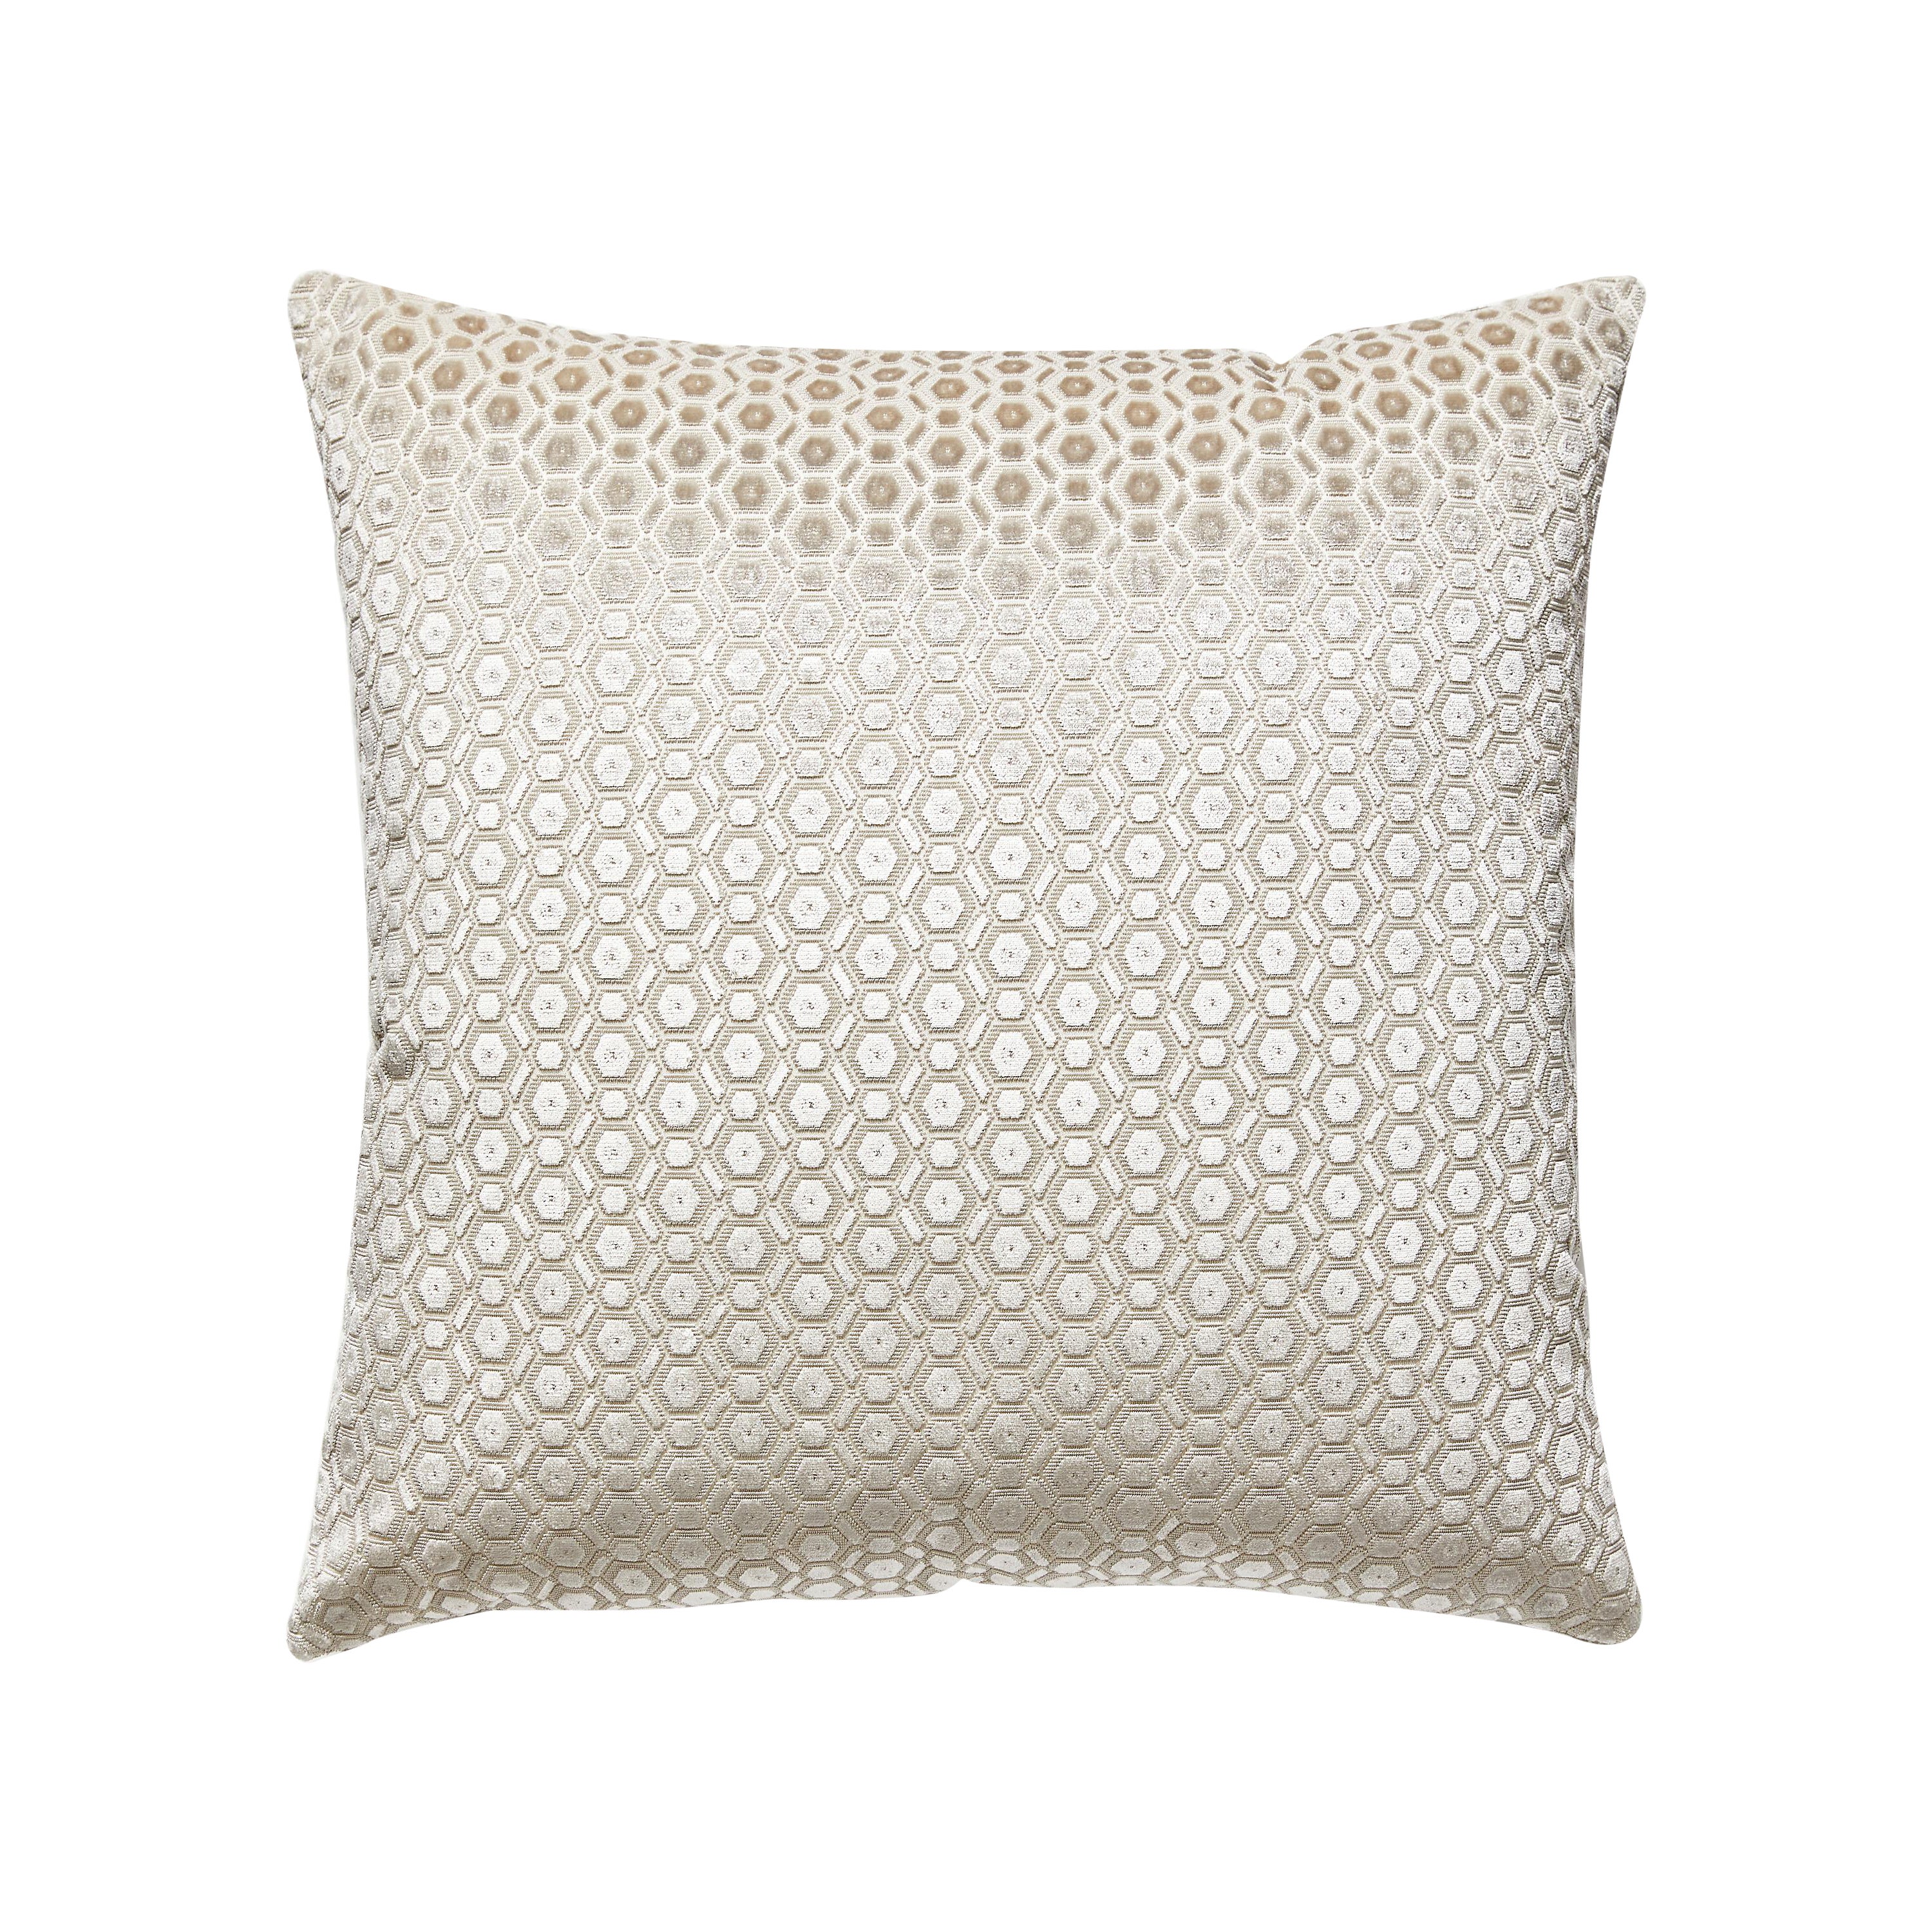 Manetta Pillow For Sale